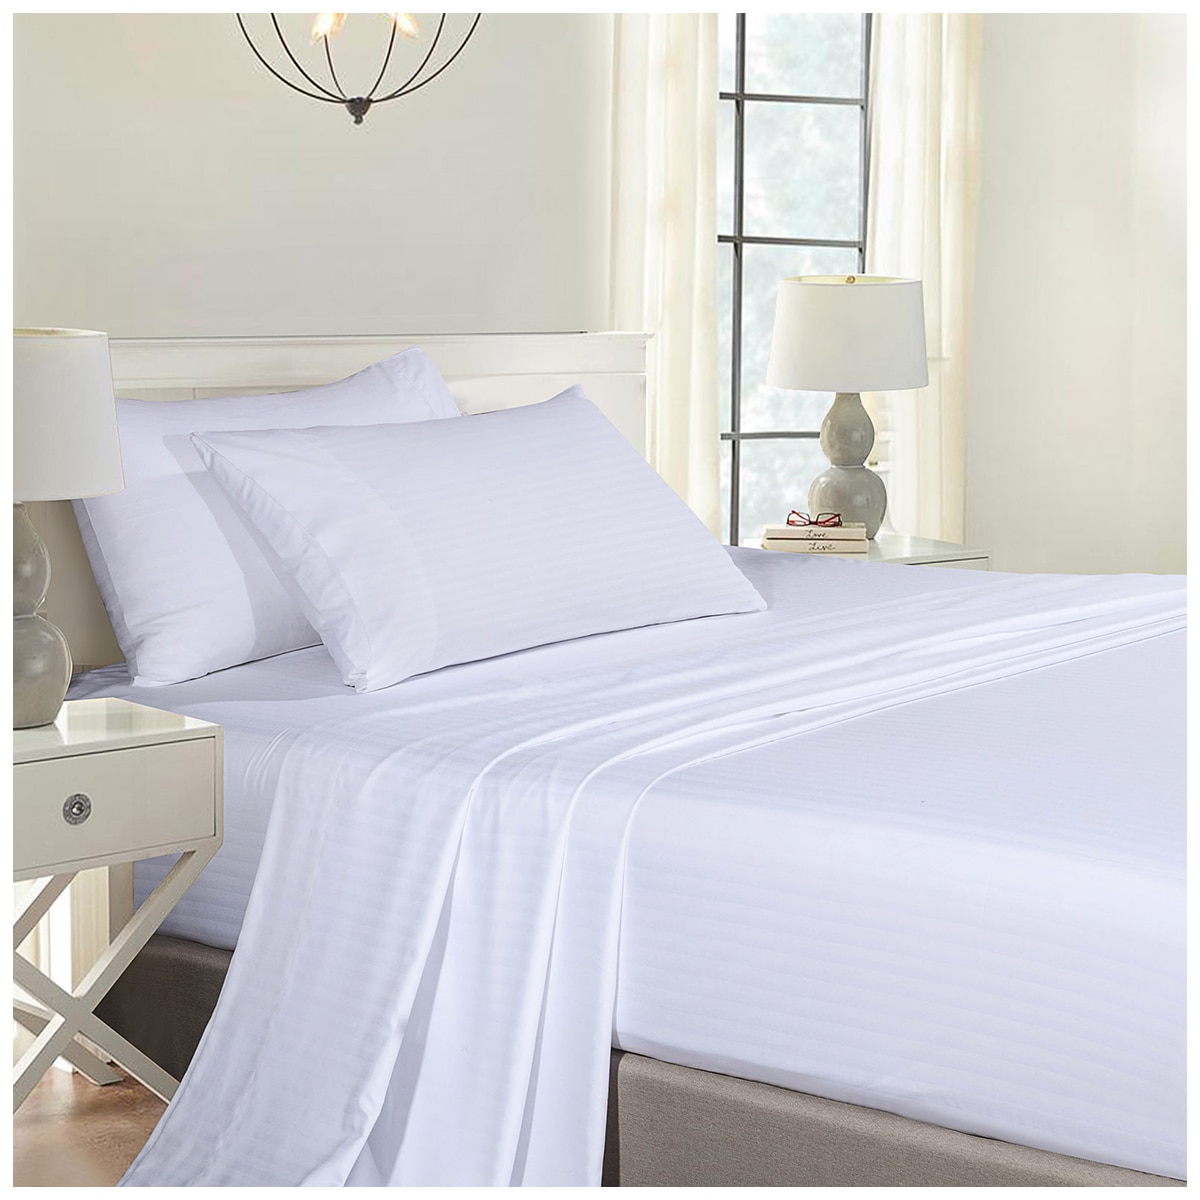 Bdirect Royal Comfort Blended Bamboo Sheet Set with stripes Queen - White